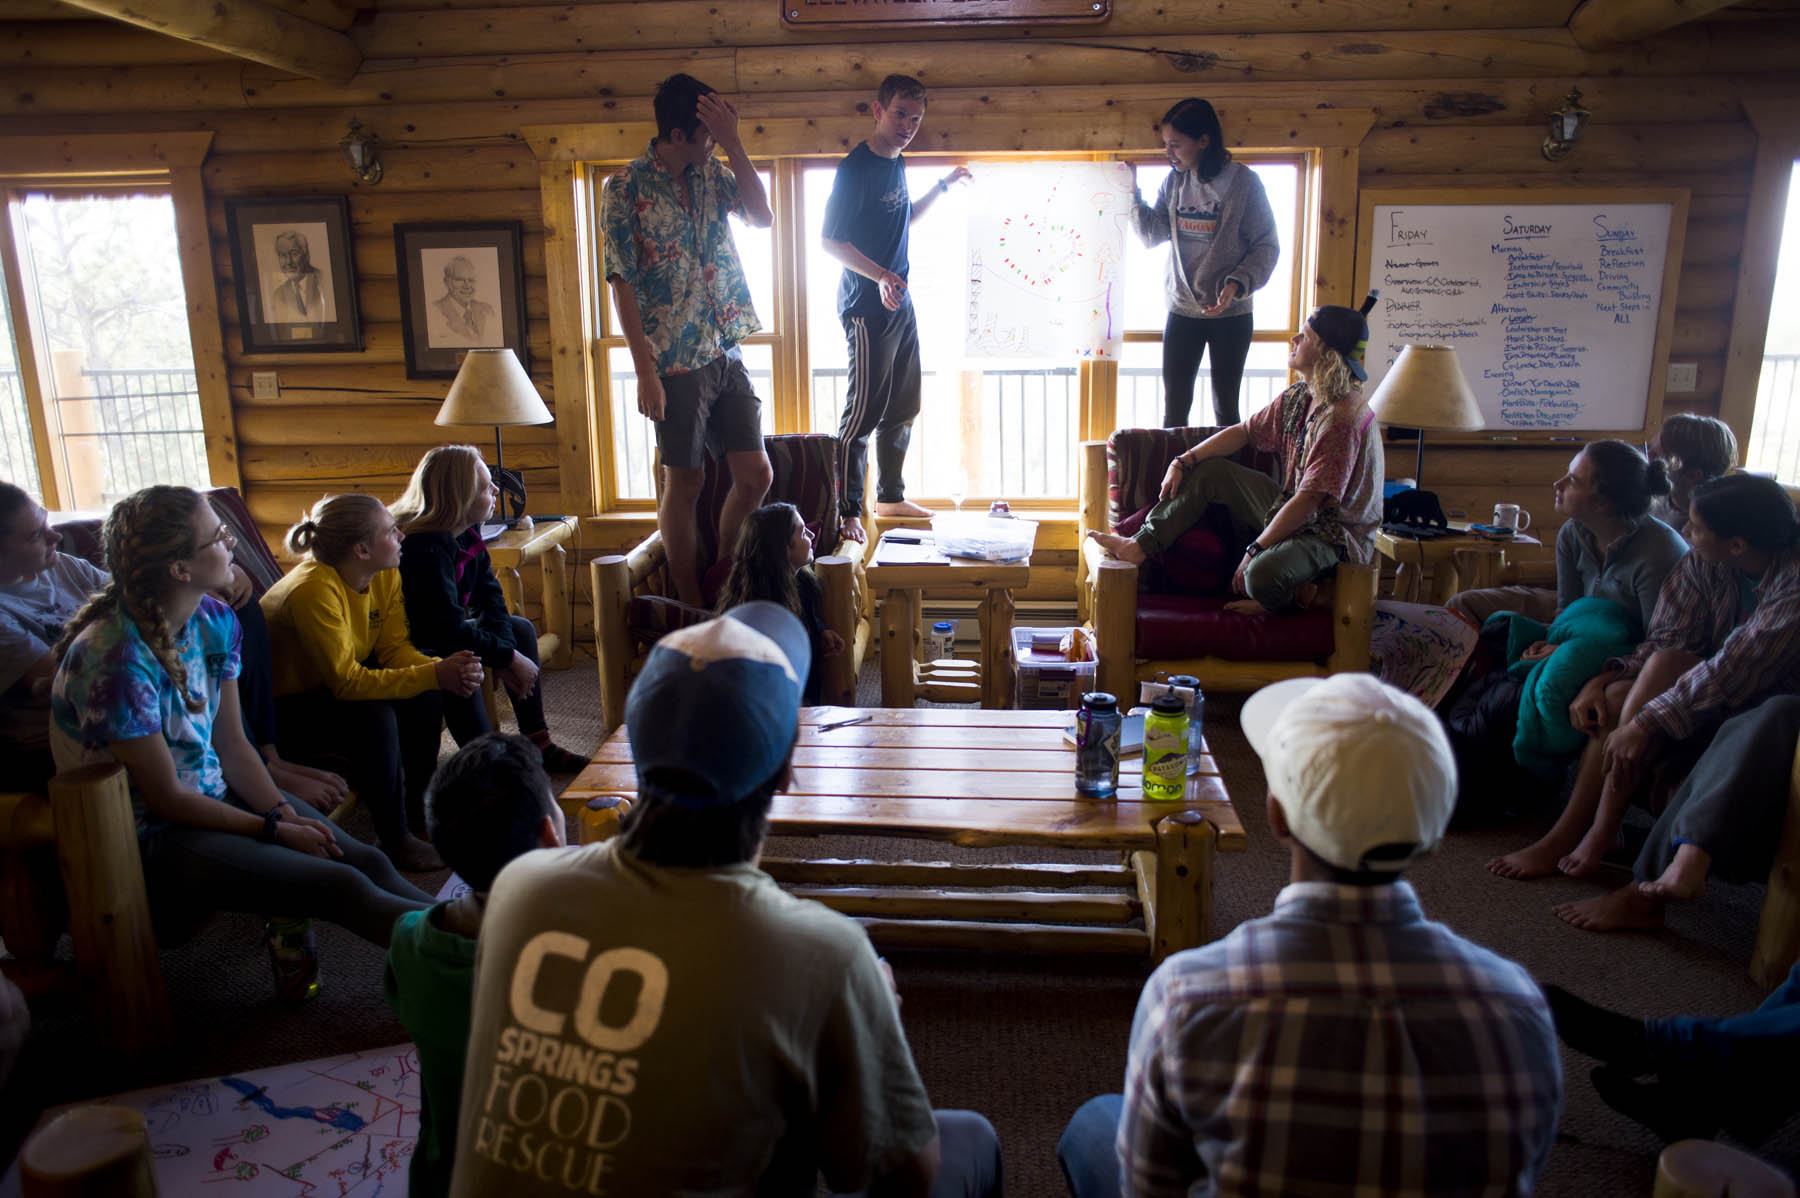 Students take turns explaining their "ideal outdoor education community" drawings during outdoor leadership training on Sunday, October 7, 2018 at the Gilmore Stabler Cabin.